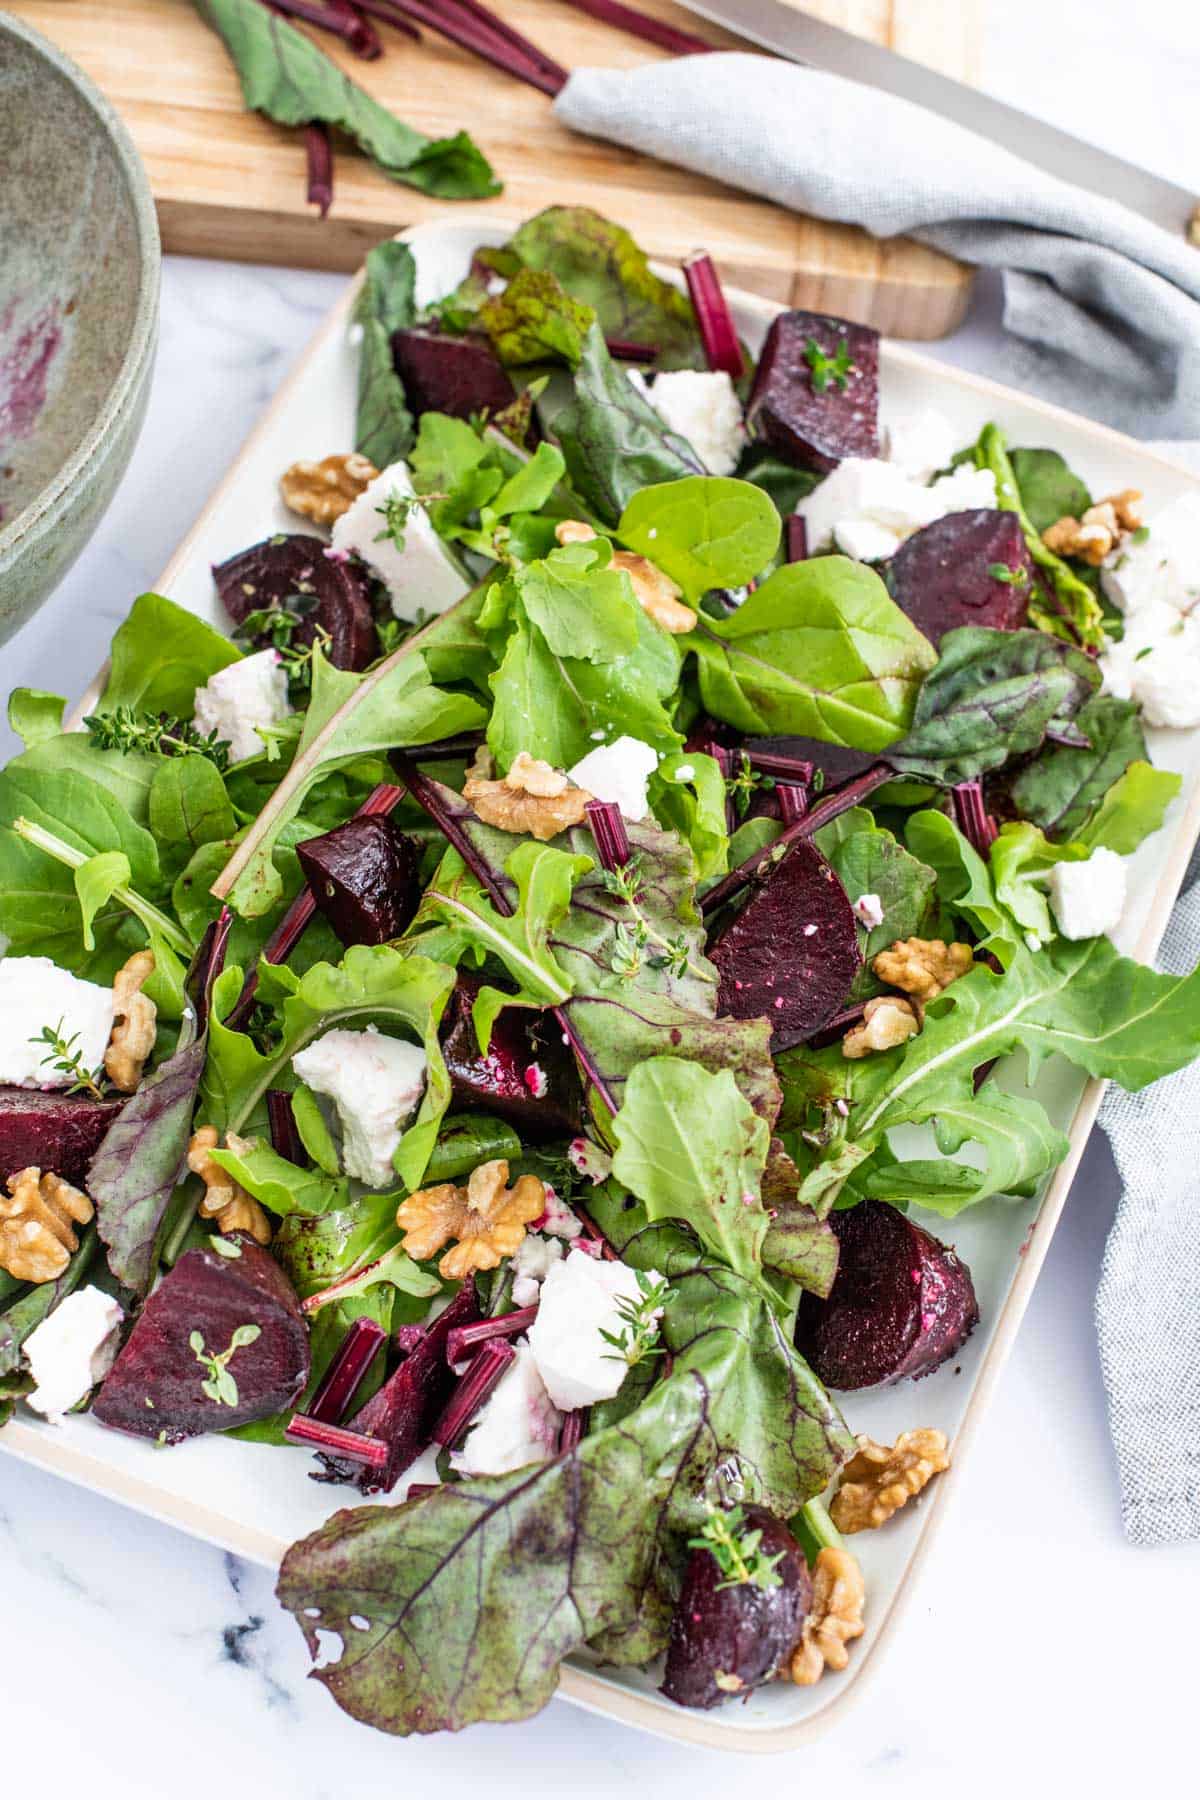 A fresh beetroot salad with mixed greens, walnuts, and fetacheese on a rectangular plate.